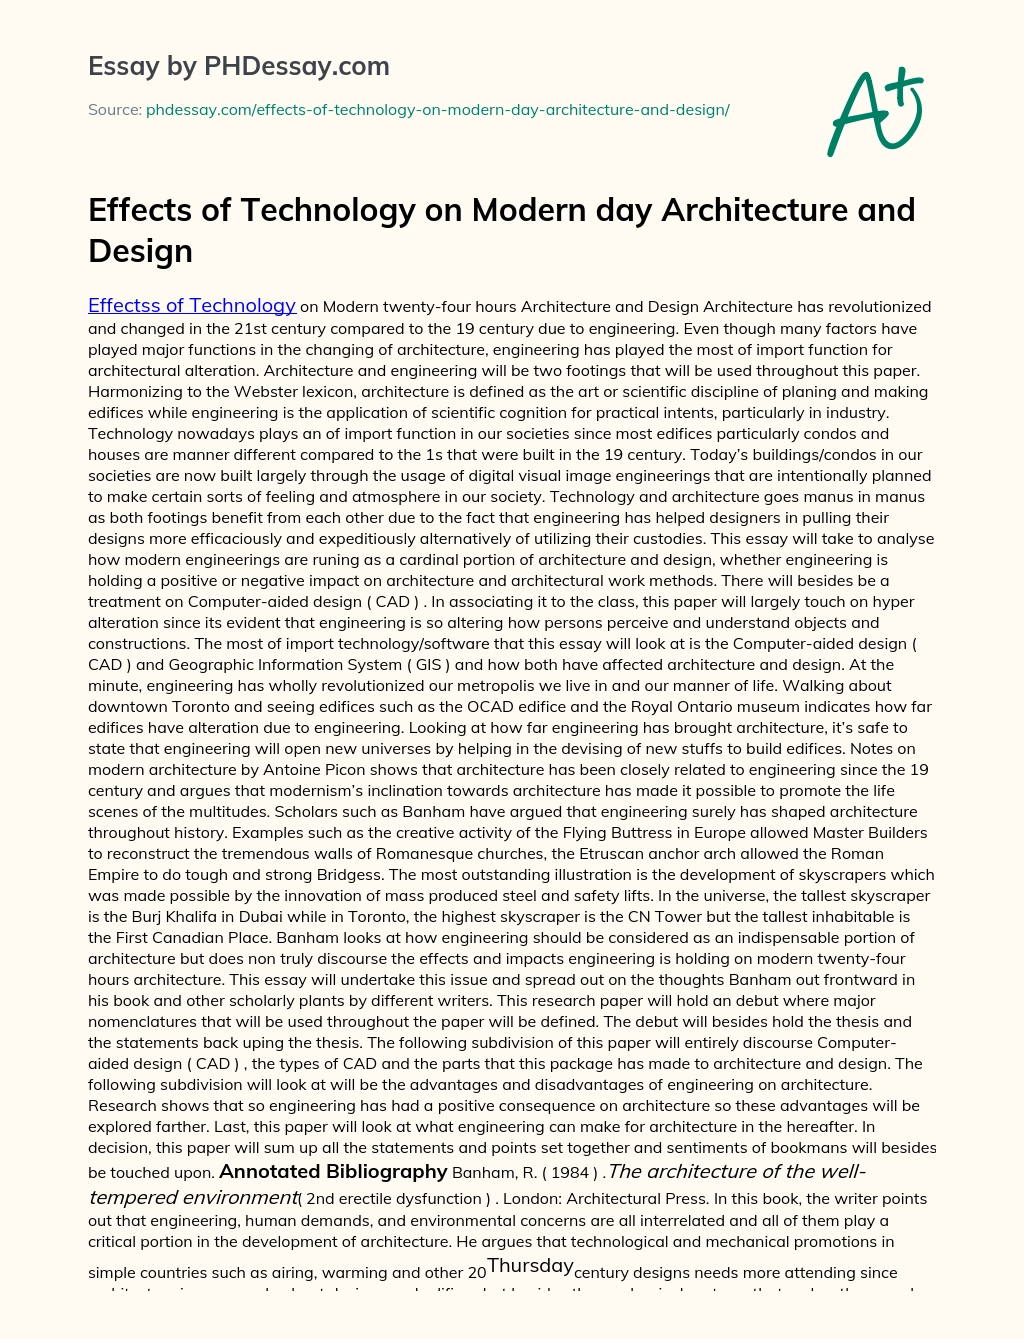 Effects of Technology on Modern day Architecture and Design essay